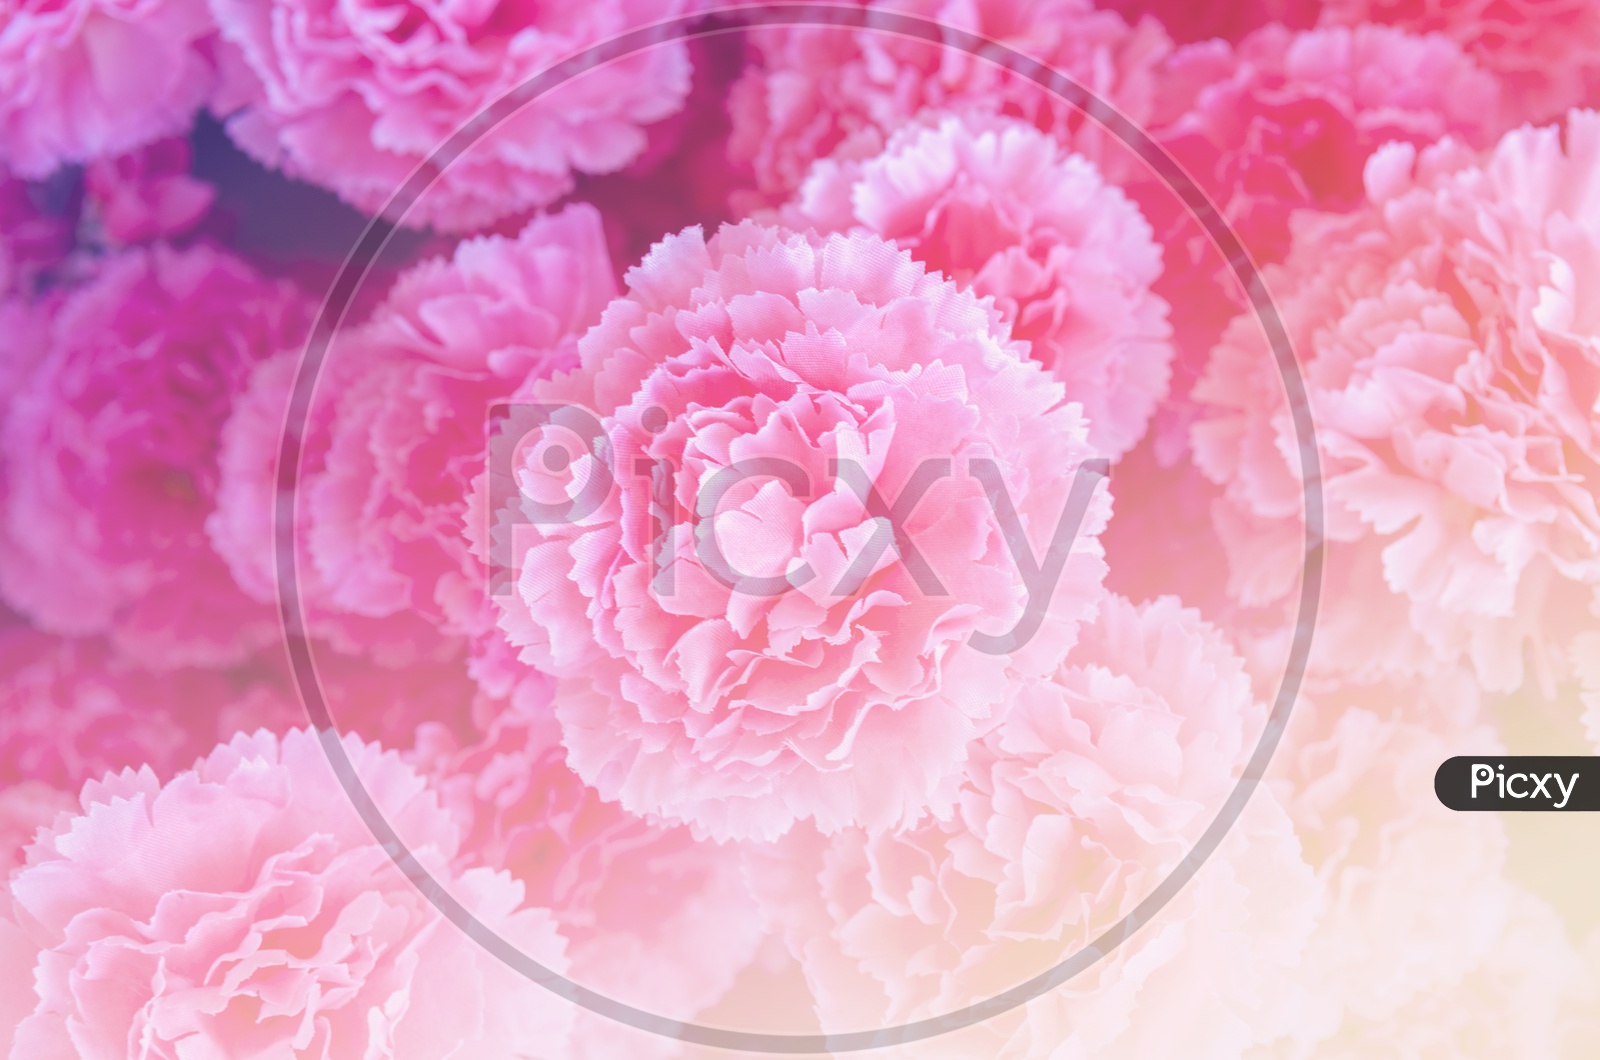 Pink flowers background for Valentine's Day